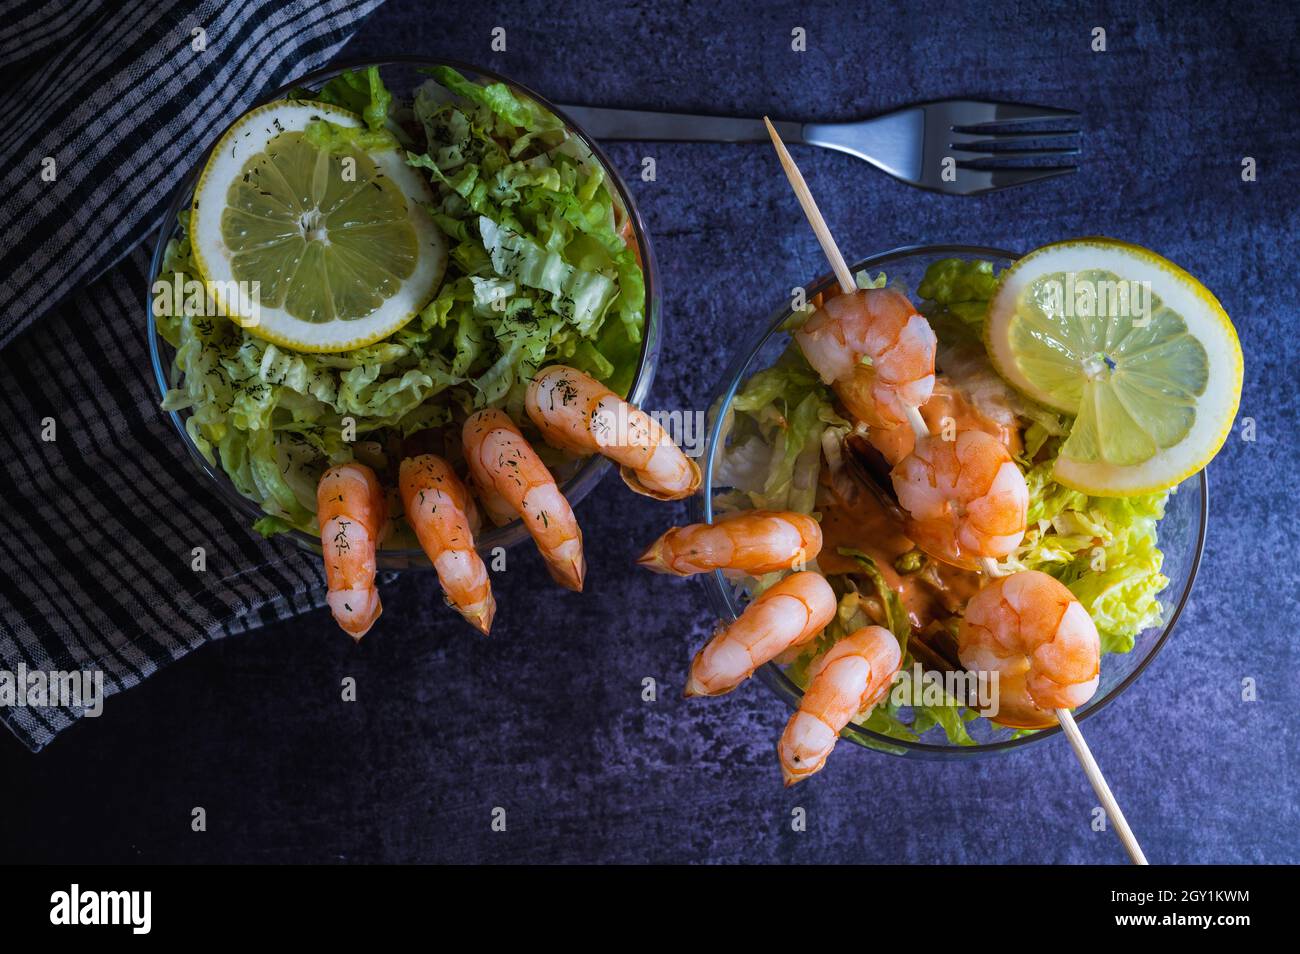 Seafood Prawn cocktail starter served in a tropical tourist restaurant in a glass with decoration of prawn with maionese sauce, lemon, lettuce and alc Stock Photo